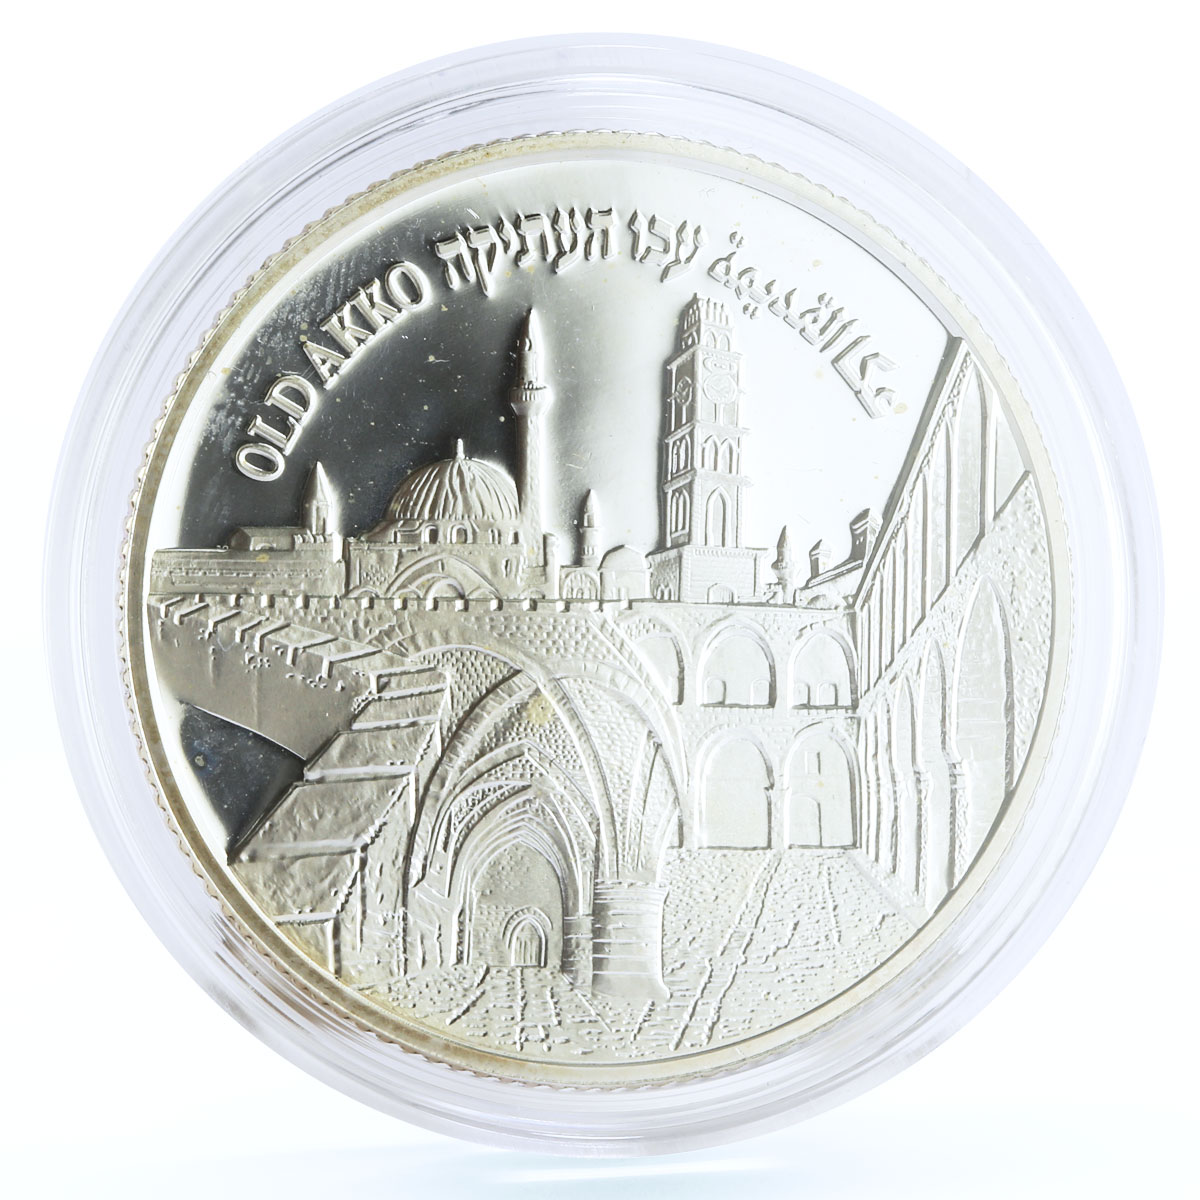 Israel 2 sheqalim Old City Akko Buildings Architecture proof silver coin 2010